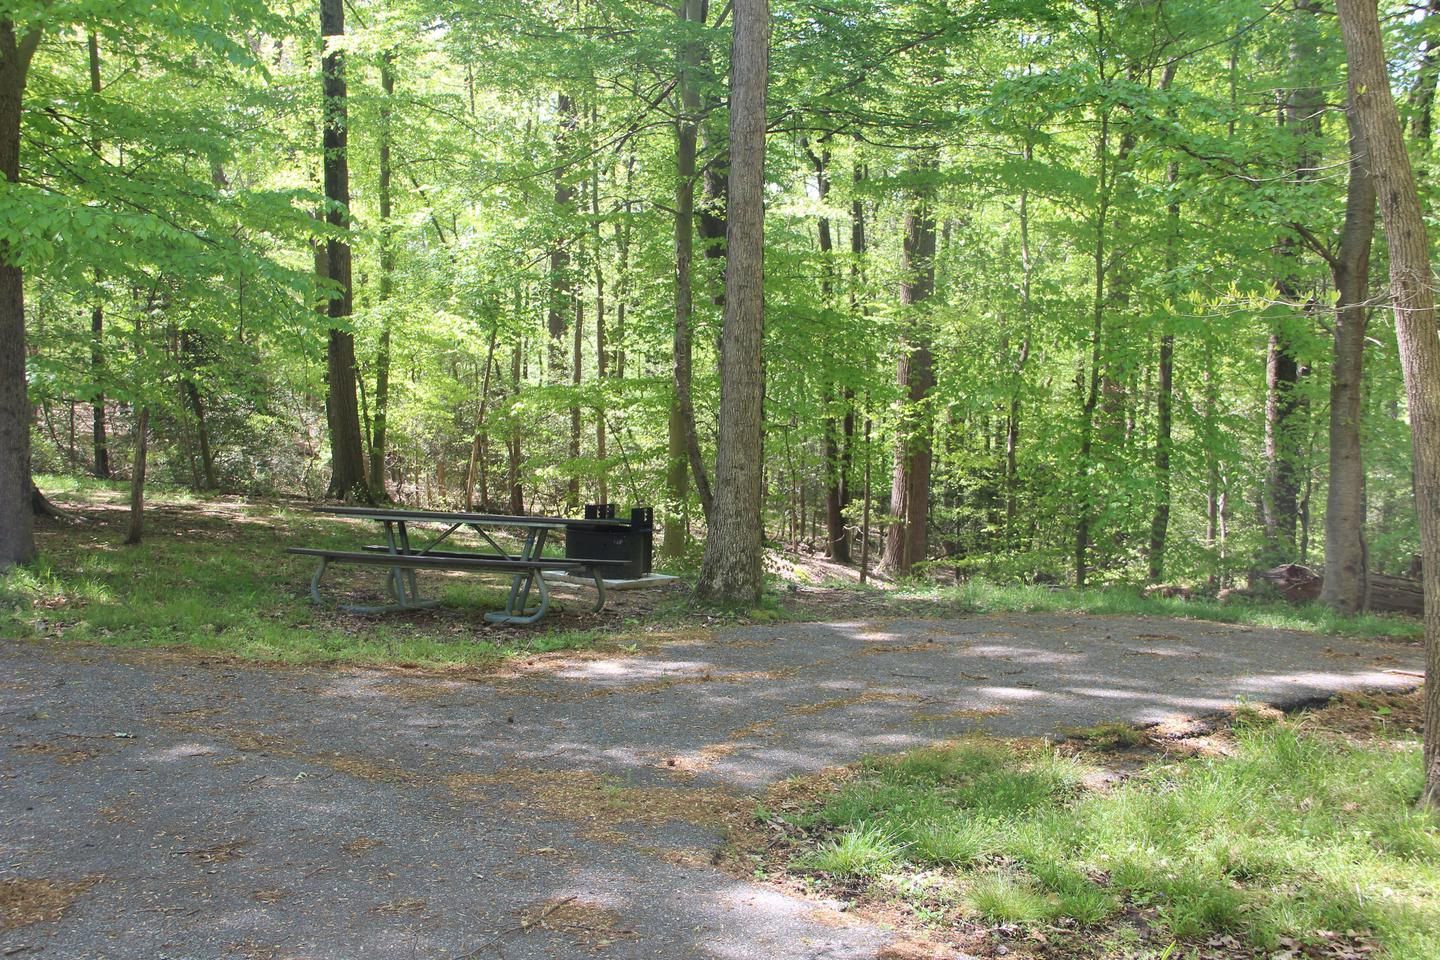 D 160 D Loop of the Greenbelt Park Md campgroundD 160 D Loop of the Greenbelt Park Maryland campground (Former Site 162)